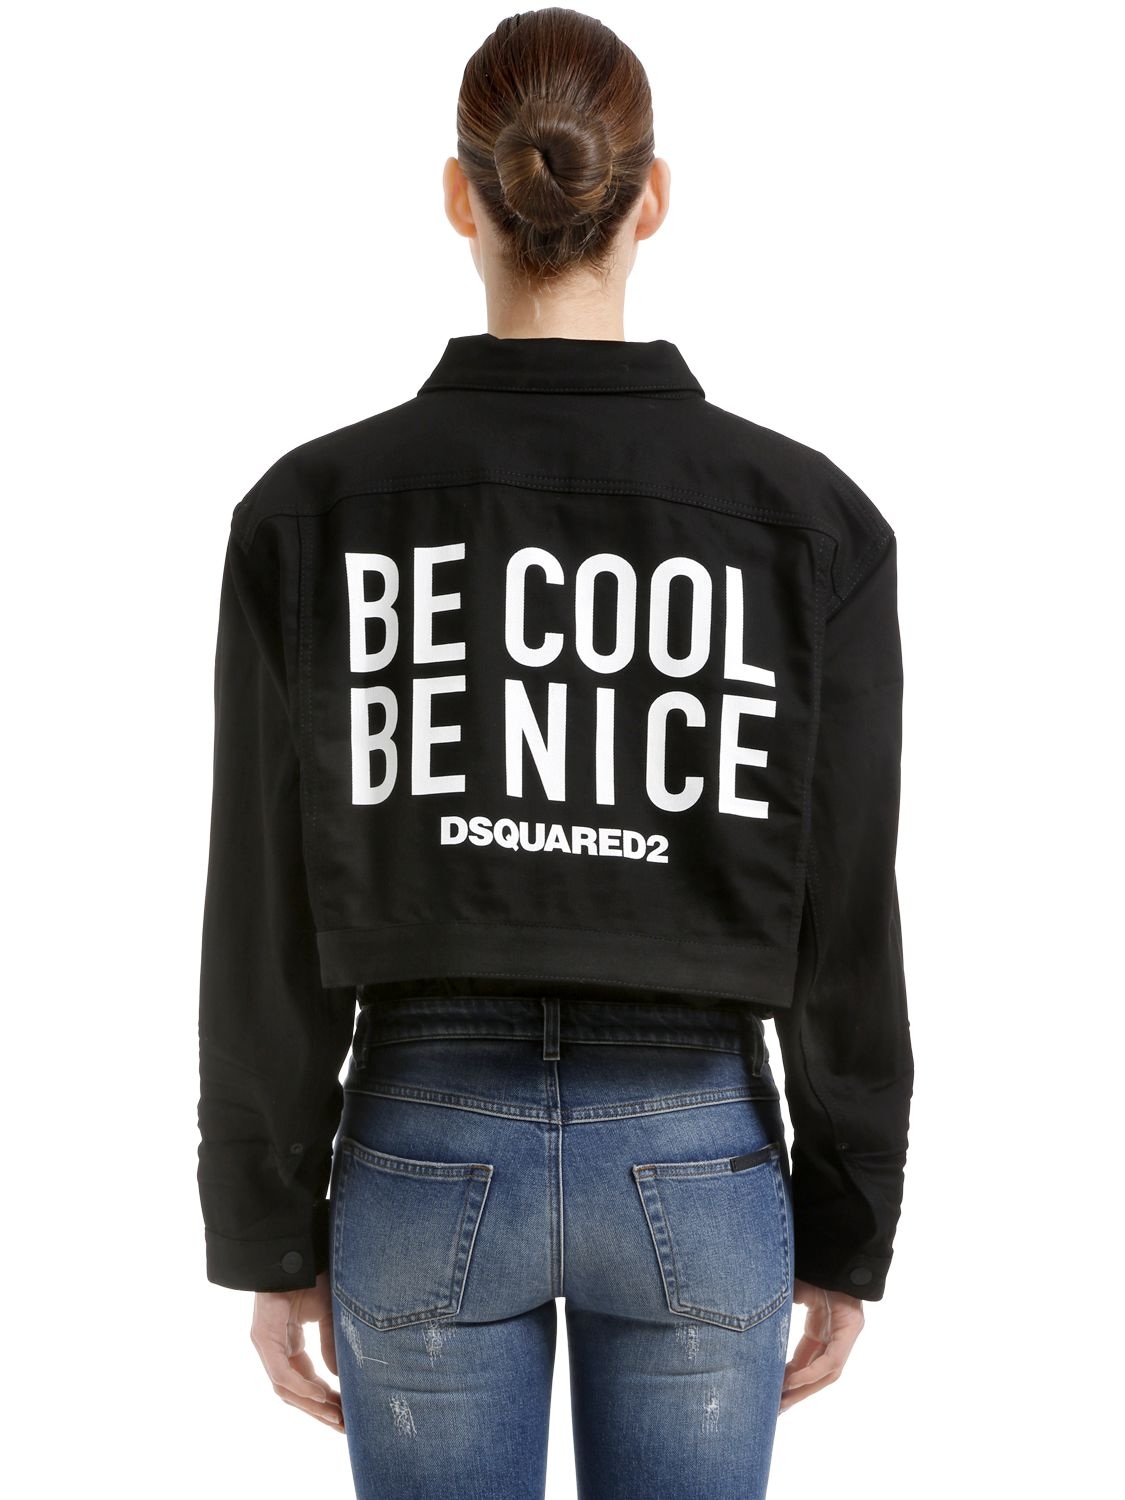 Dsquared2 Be Cool Be Nice Denim Jacket In Black